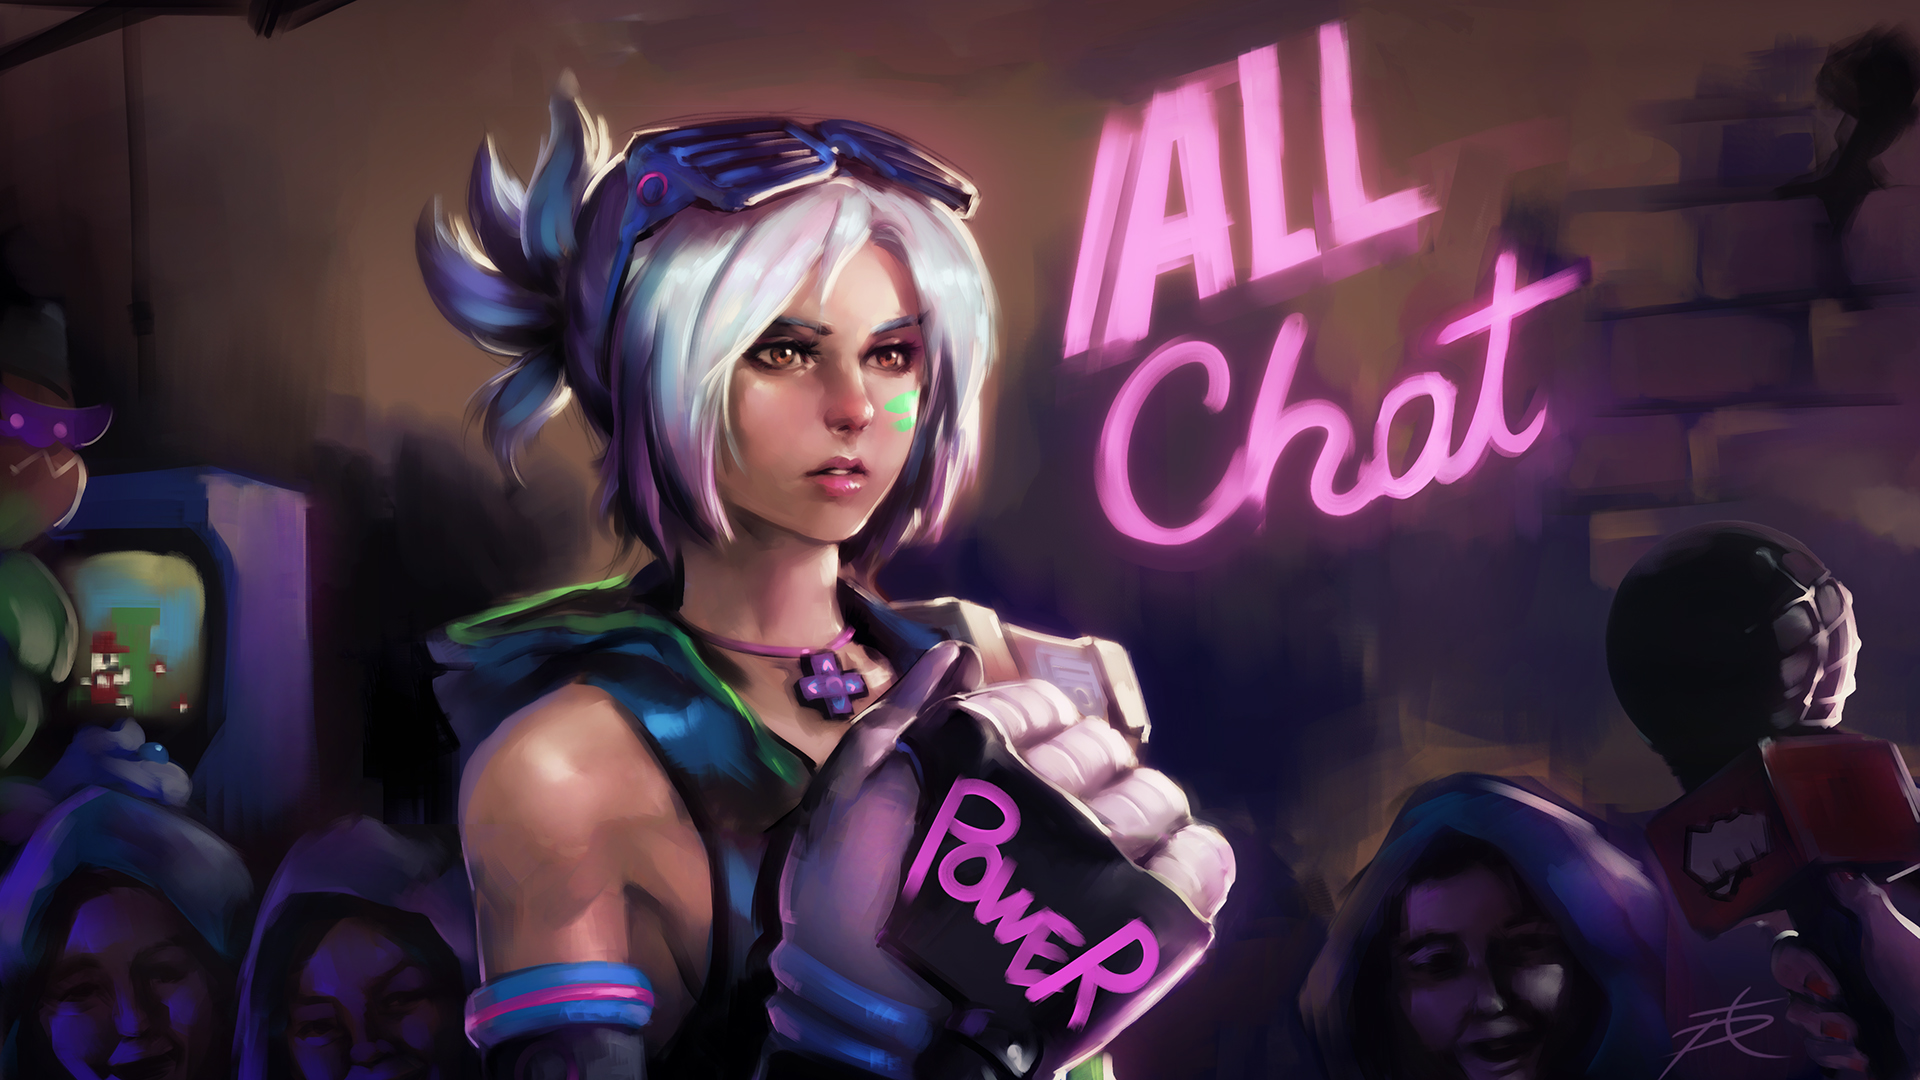 Arcade Riven With The All Chat Full Size By Ptcrow